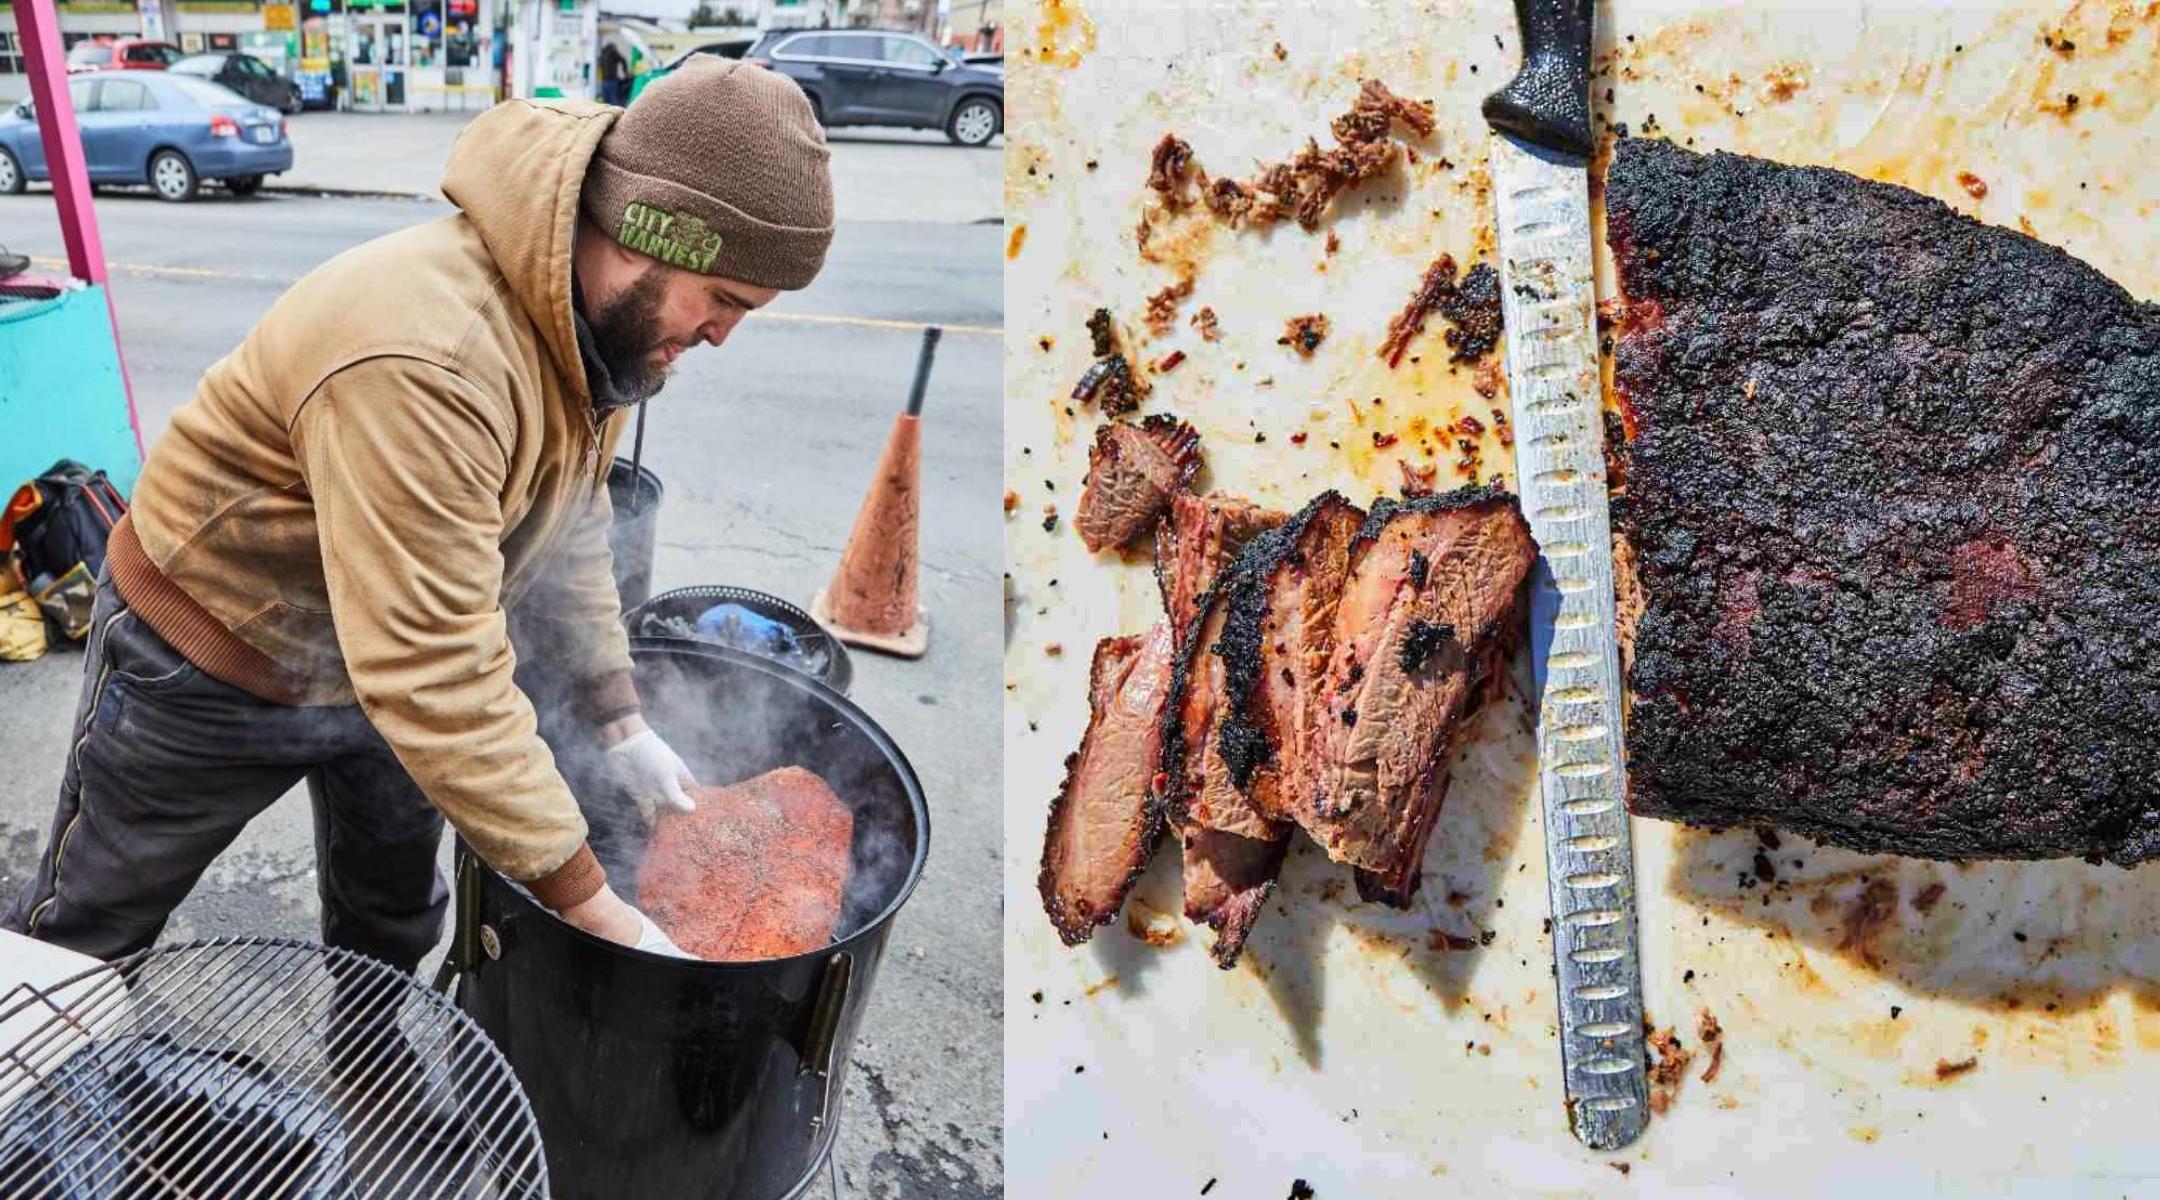 This Jewish pitmaster in Queens would make barbecue to mend the globe